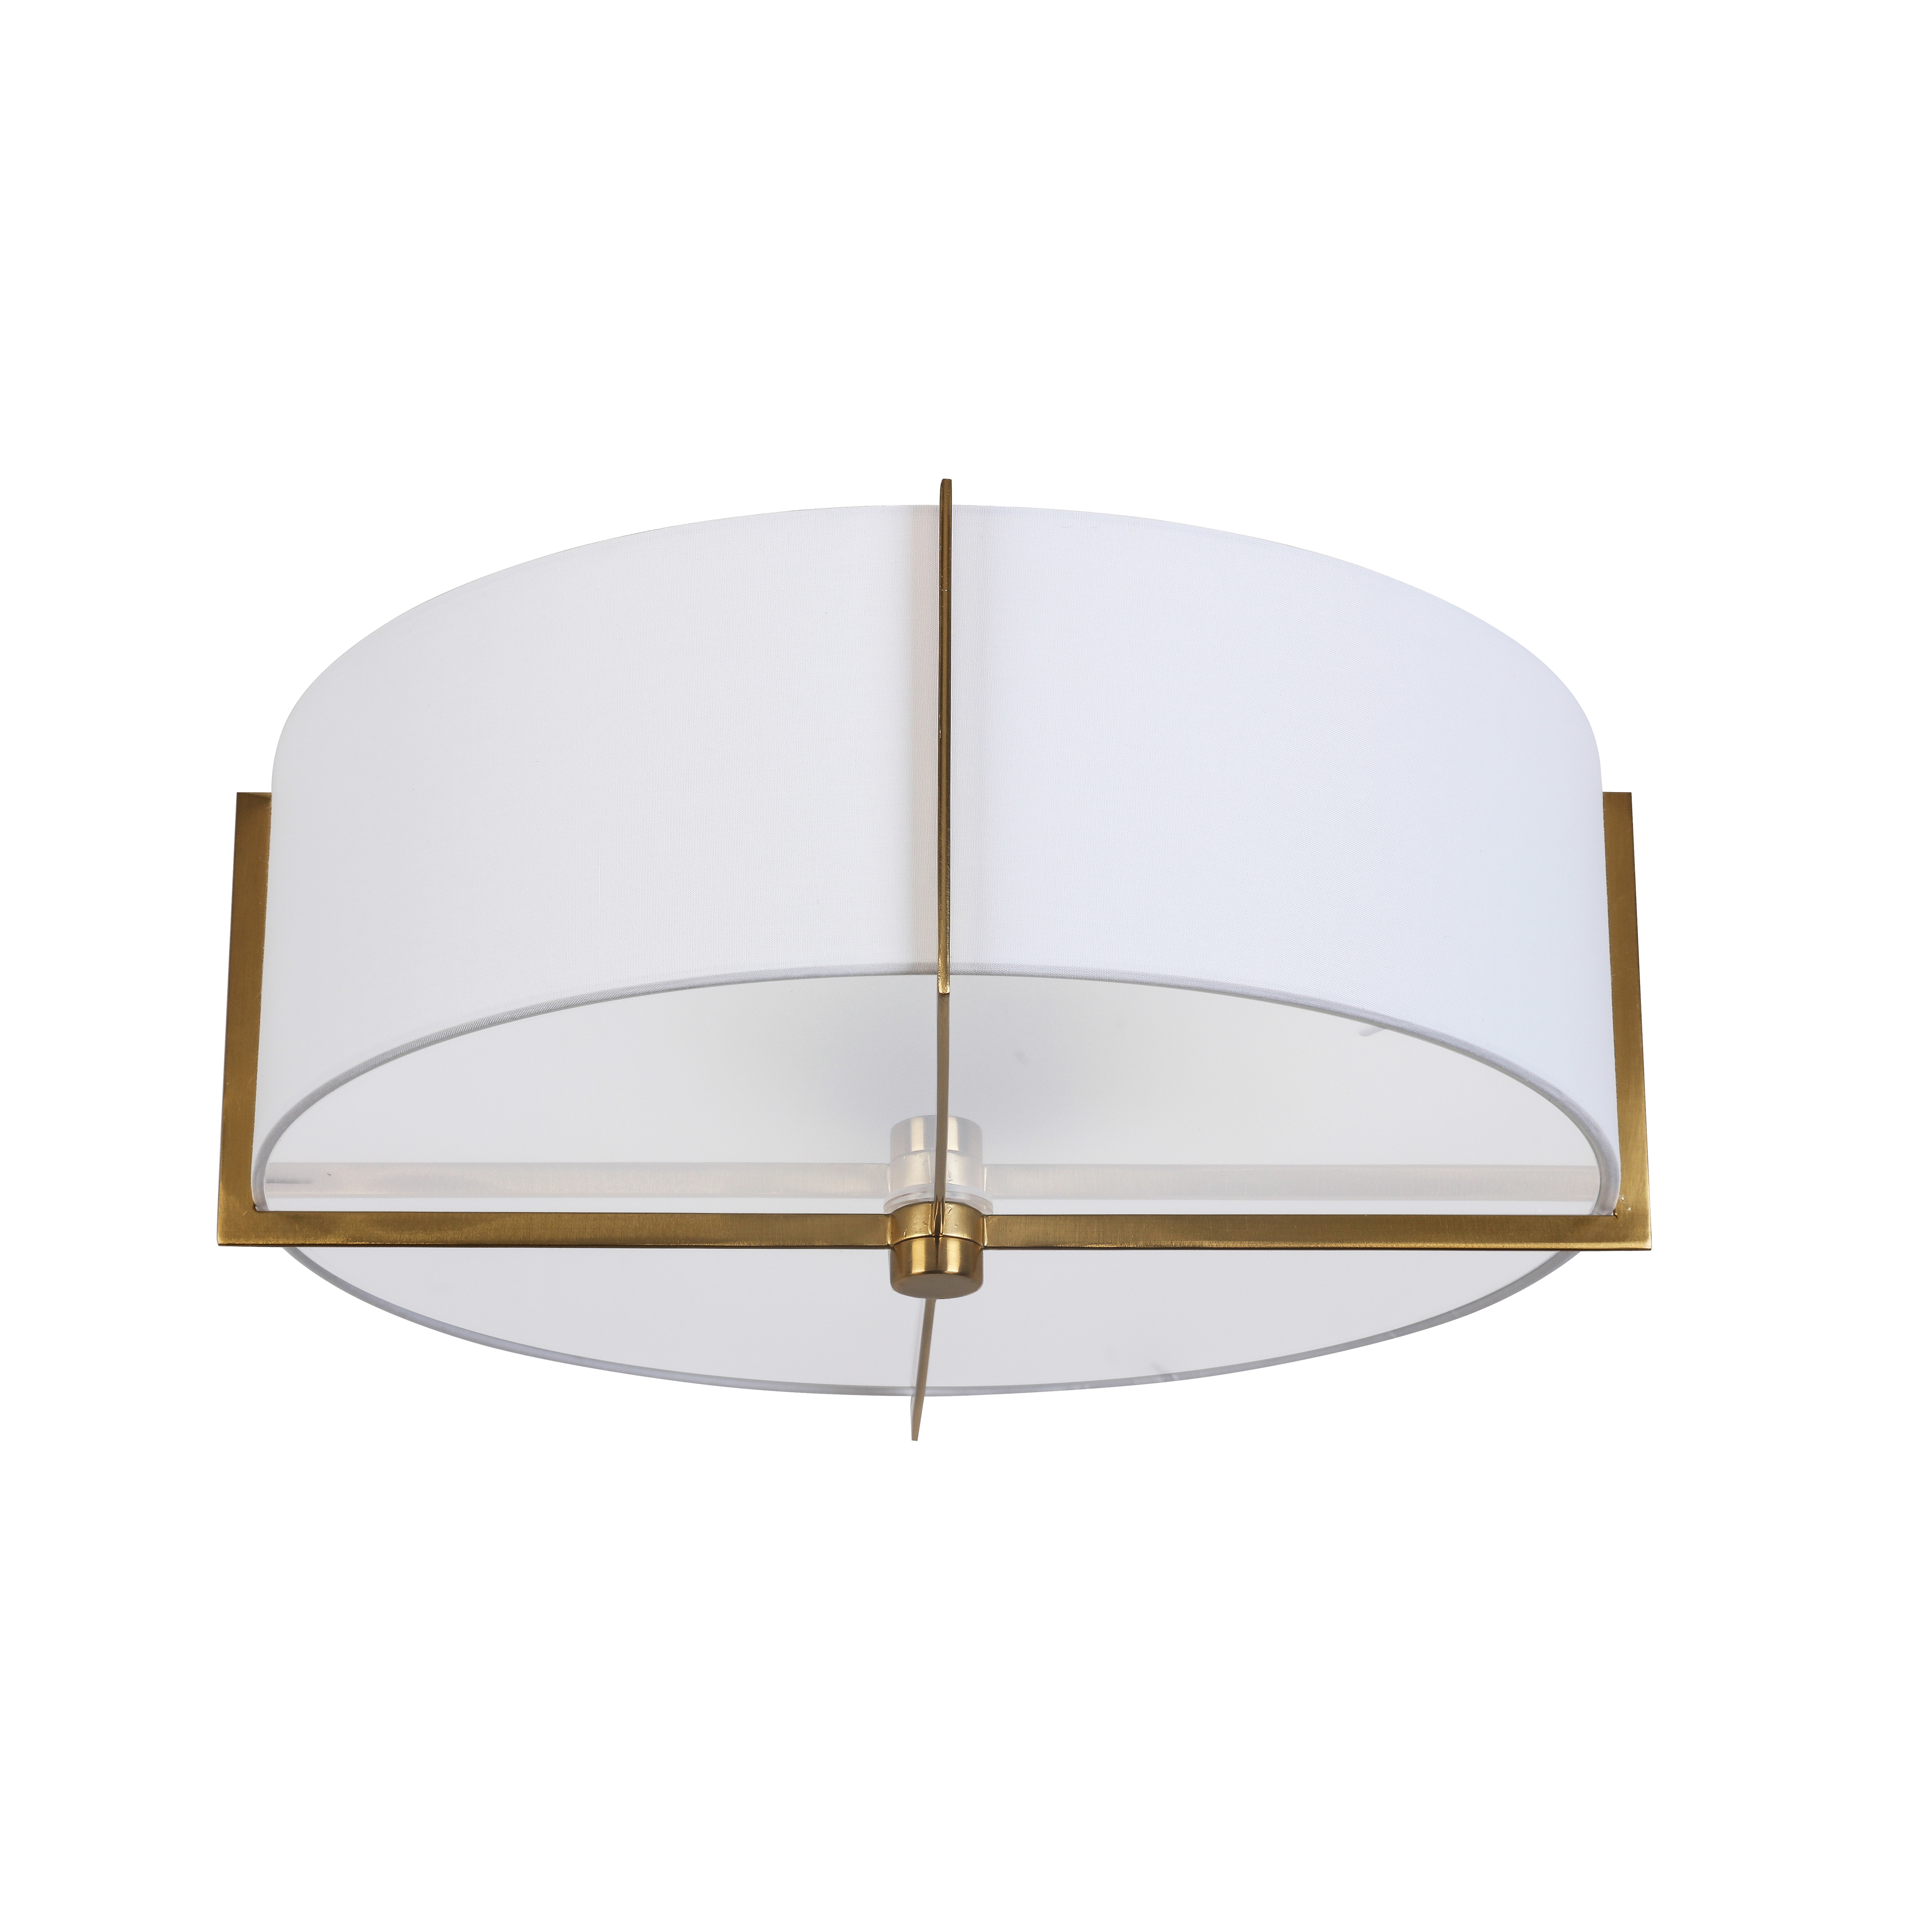 The Preston family of lighting offers a sleek silhouette with contrasting detail that draws the eye. It makes a statement, but blends easily with contemporary, ultra-modern and minimalist décor schemes. The look is based on a fabric drum shade with a relatively narrow profile, available in a choice of fashionable neutrals. The contrasting metal frame holds the shade in place with strong horizontal and vertical lines, while a glass diffuser creates ambient lighting. With its pared down design, Preston lighting has a versatile appeal that will suit many areas of the home from living and dining rooms to kitchen, bedroom and hallways, or an office setting.